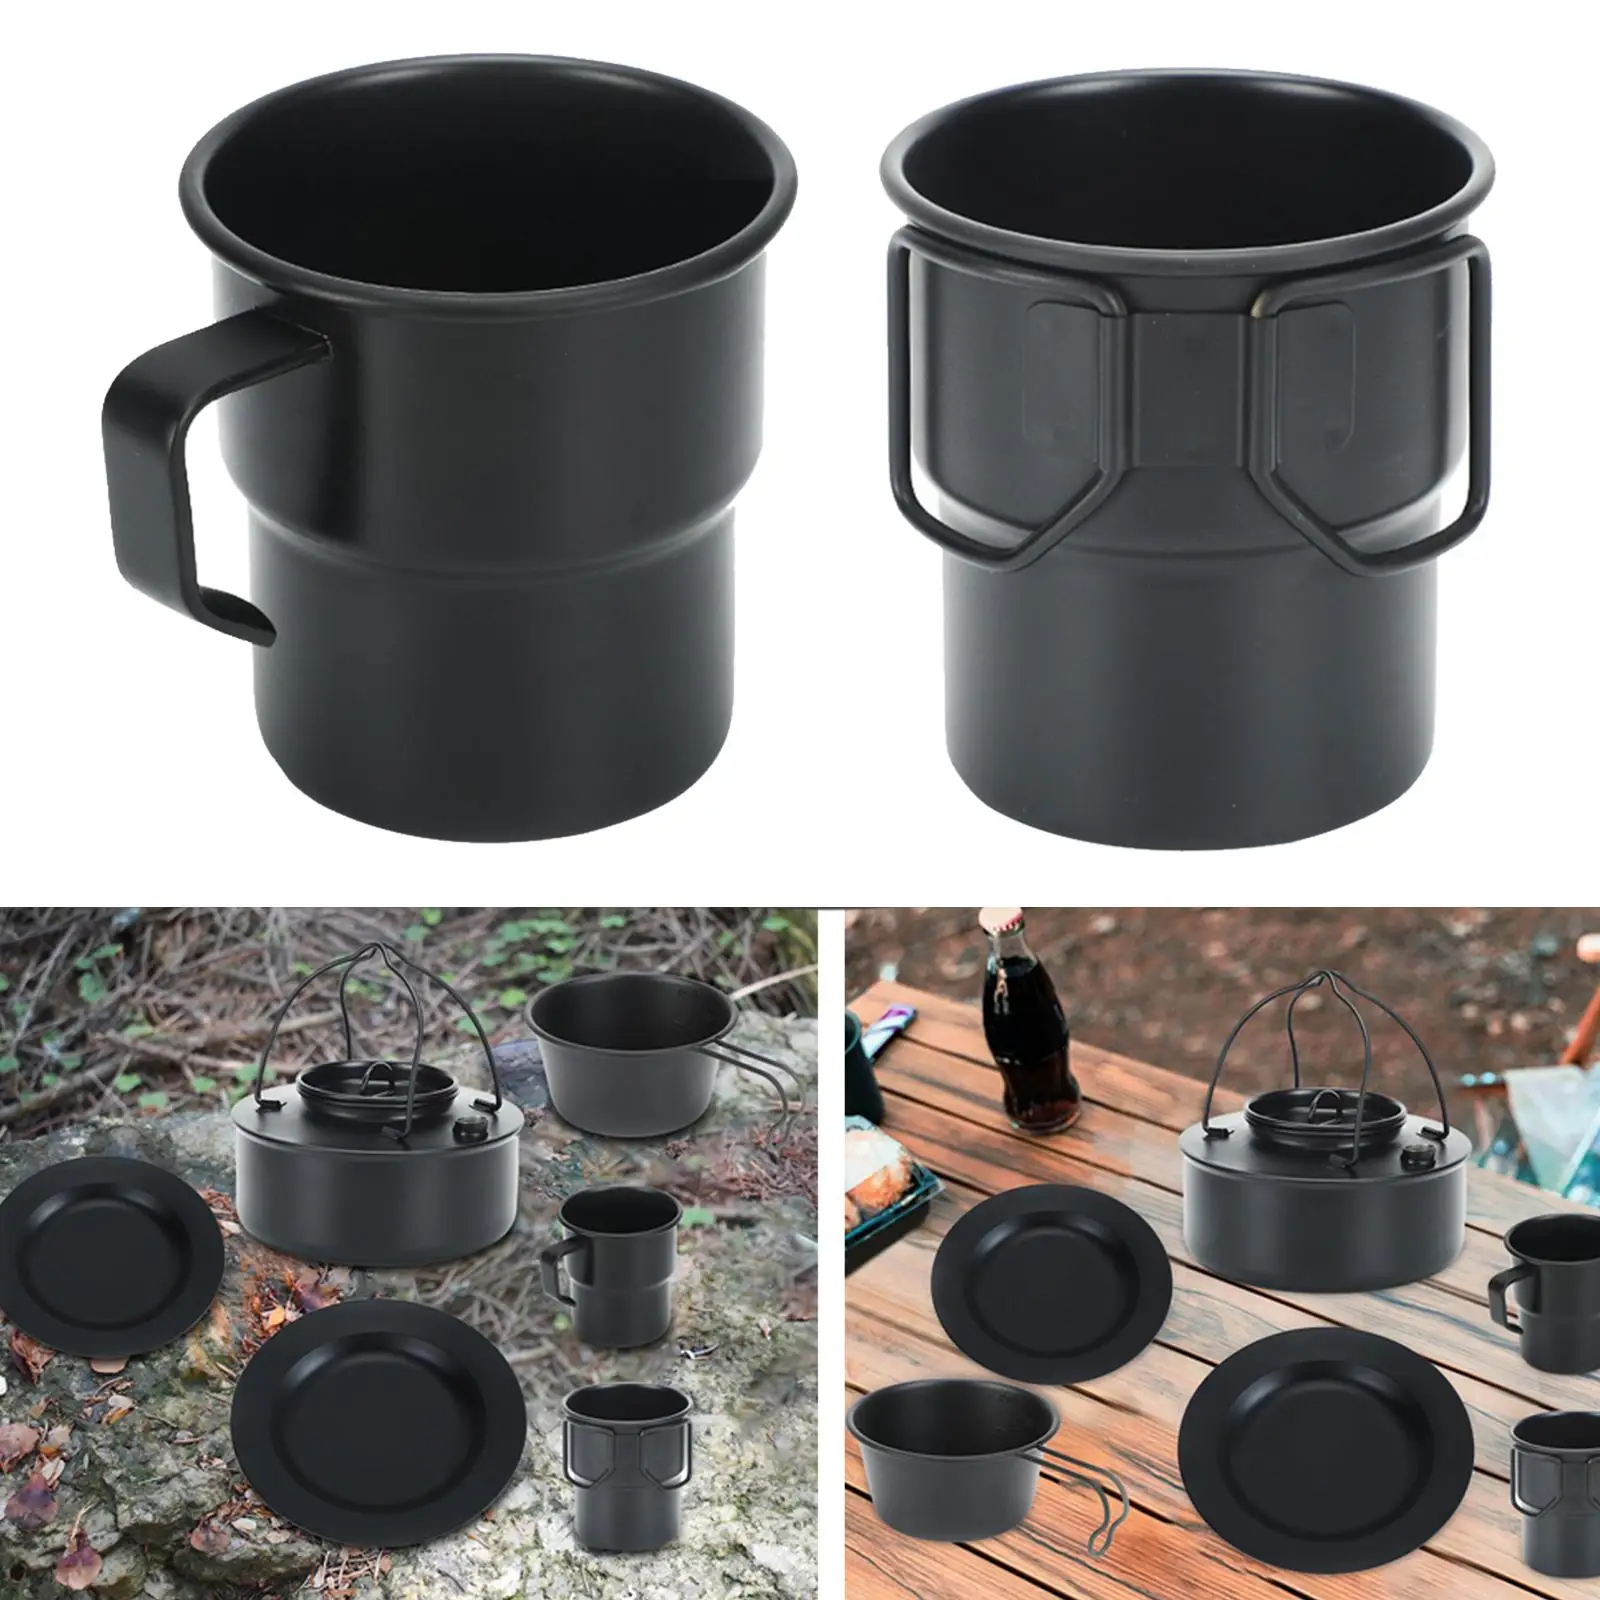 Stainless Steel Outdoor Tea Coffee Mug with Handle Drinkware 300ml Camping Cup for BBQ